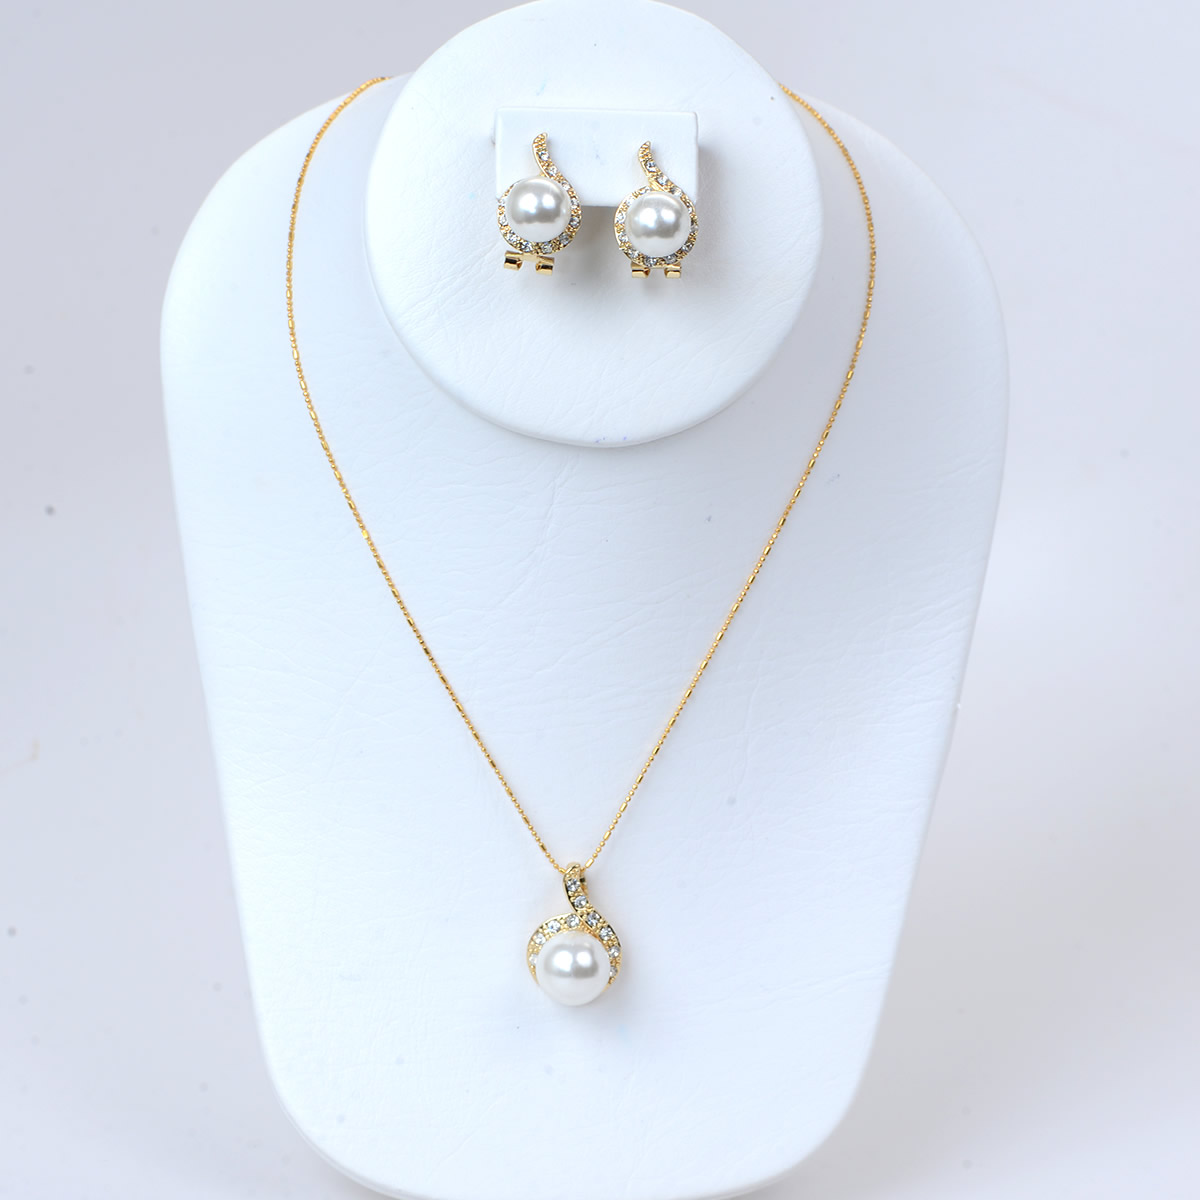 Brilliant Pearlesque Necklace and Earring Set